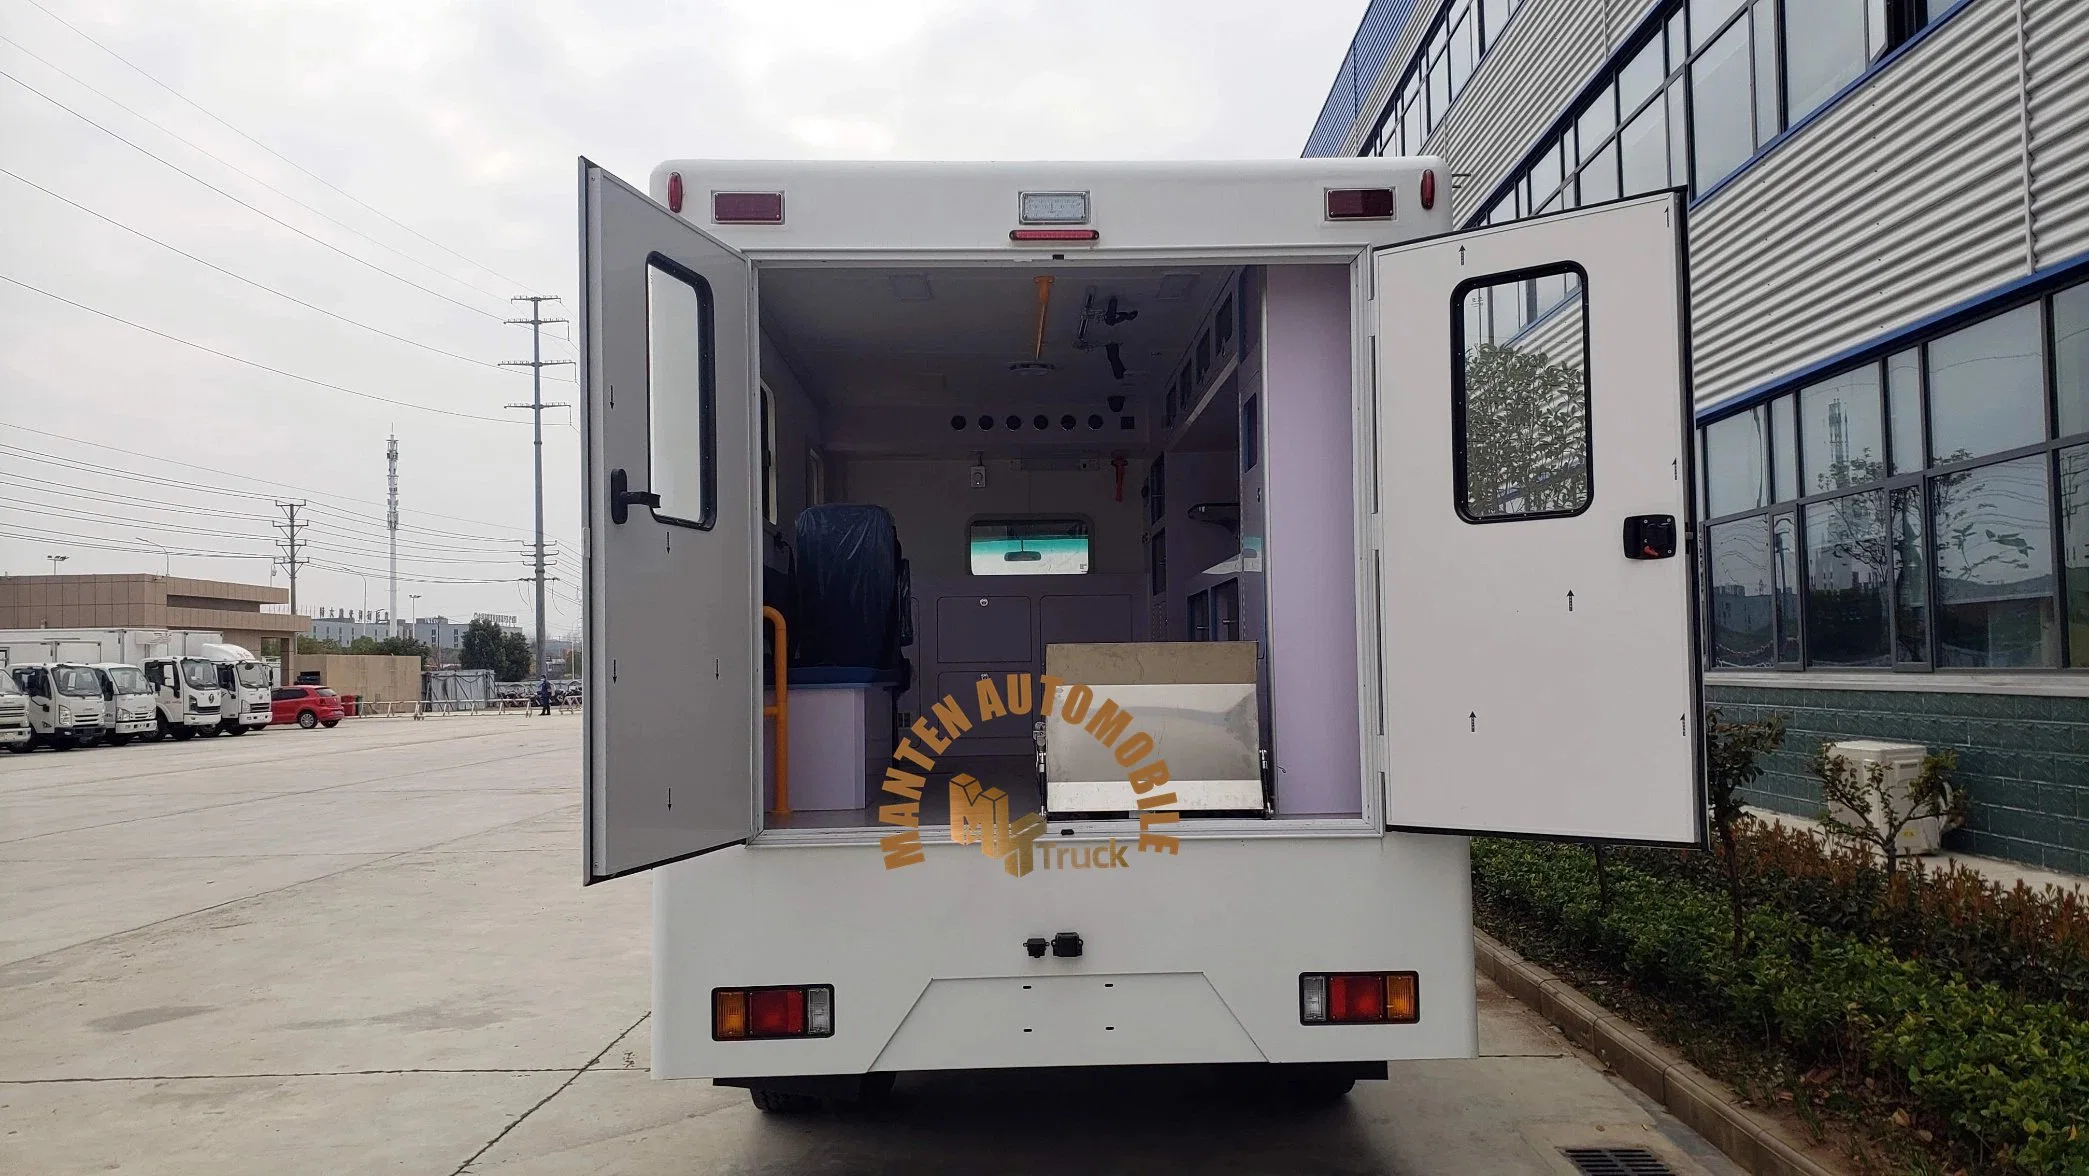 Manual Diesel Negative Pressure Rescue Vehicle Ambulance Medical Truck with Cheap Price